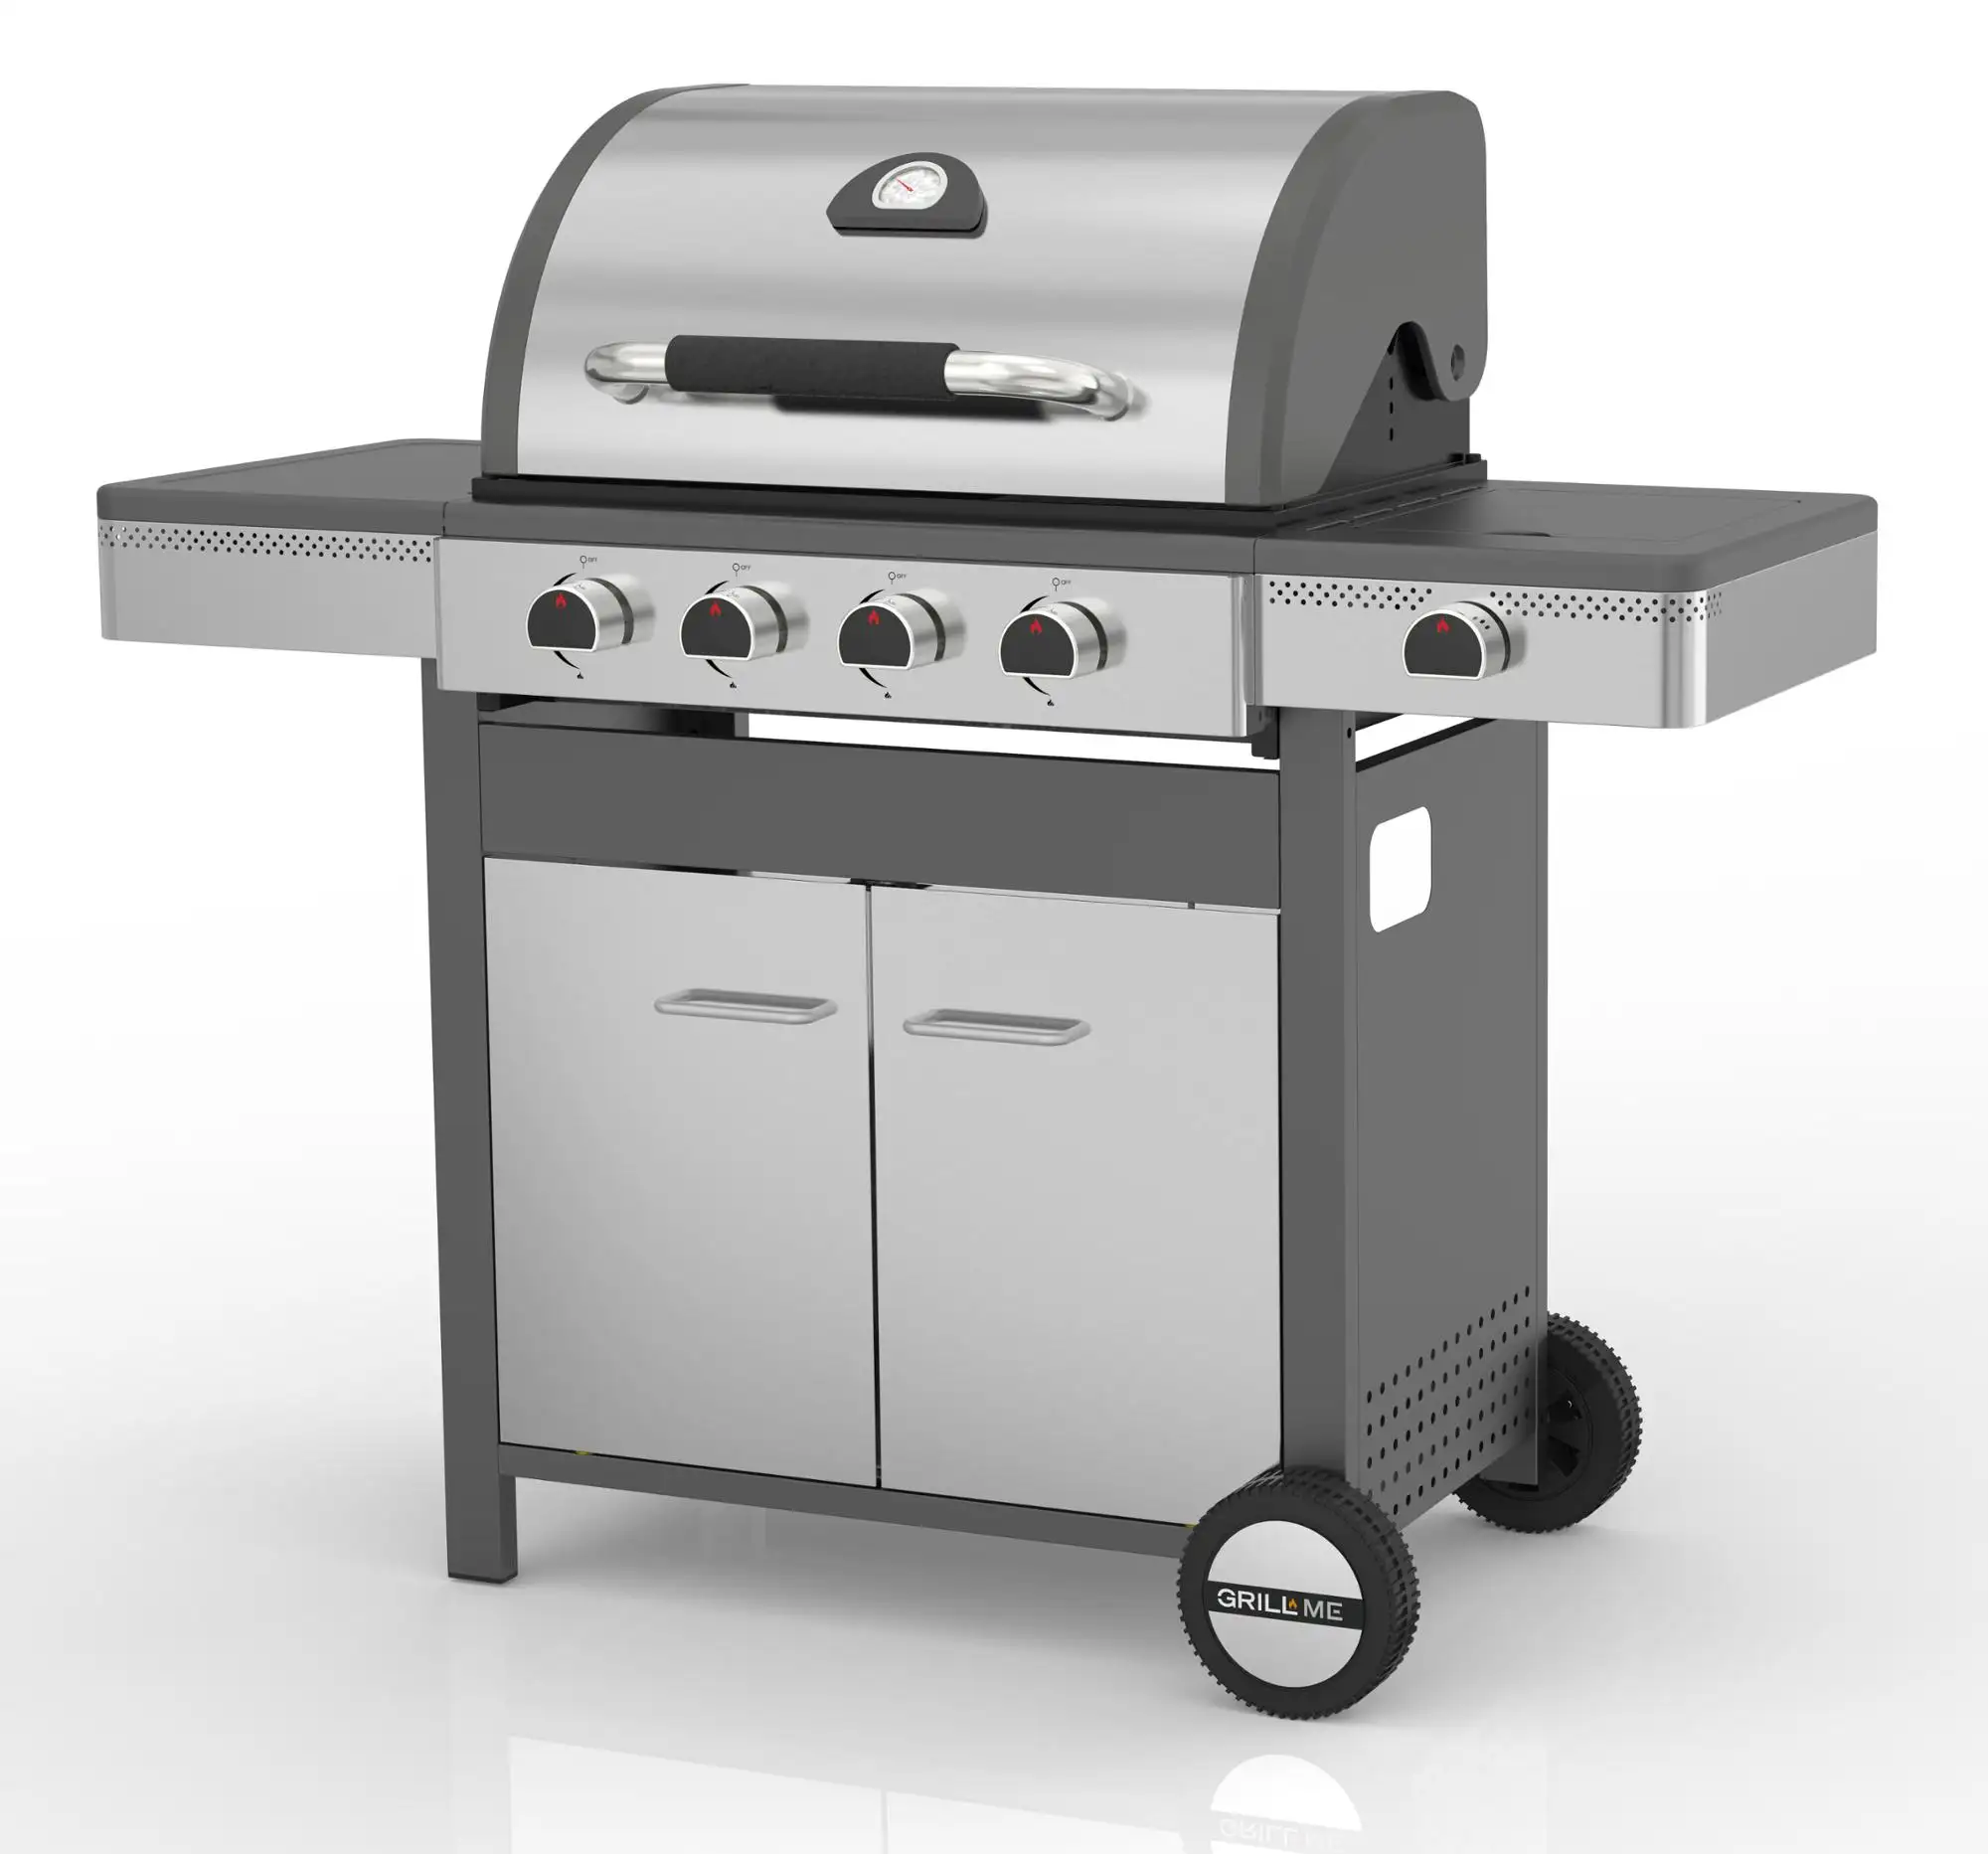 Outdoor Gas Grill With Butane Barbecue Grill - Buy Gas Gas Bbq Grill,Butane Bbq Gas Grill Product on Alibaba.com